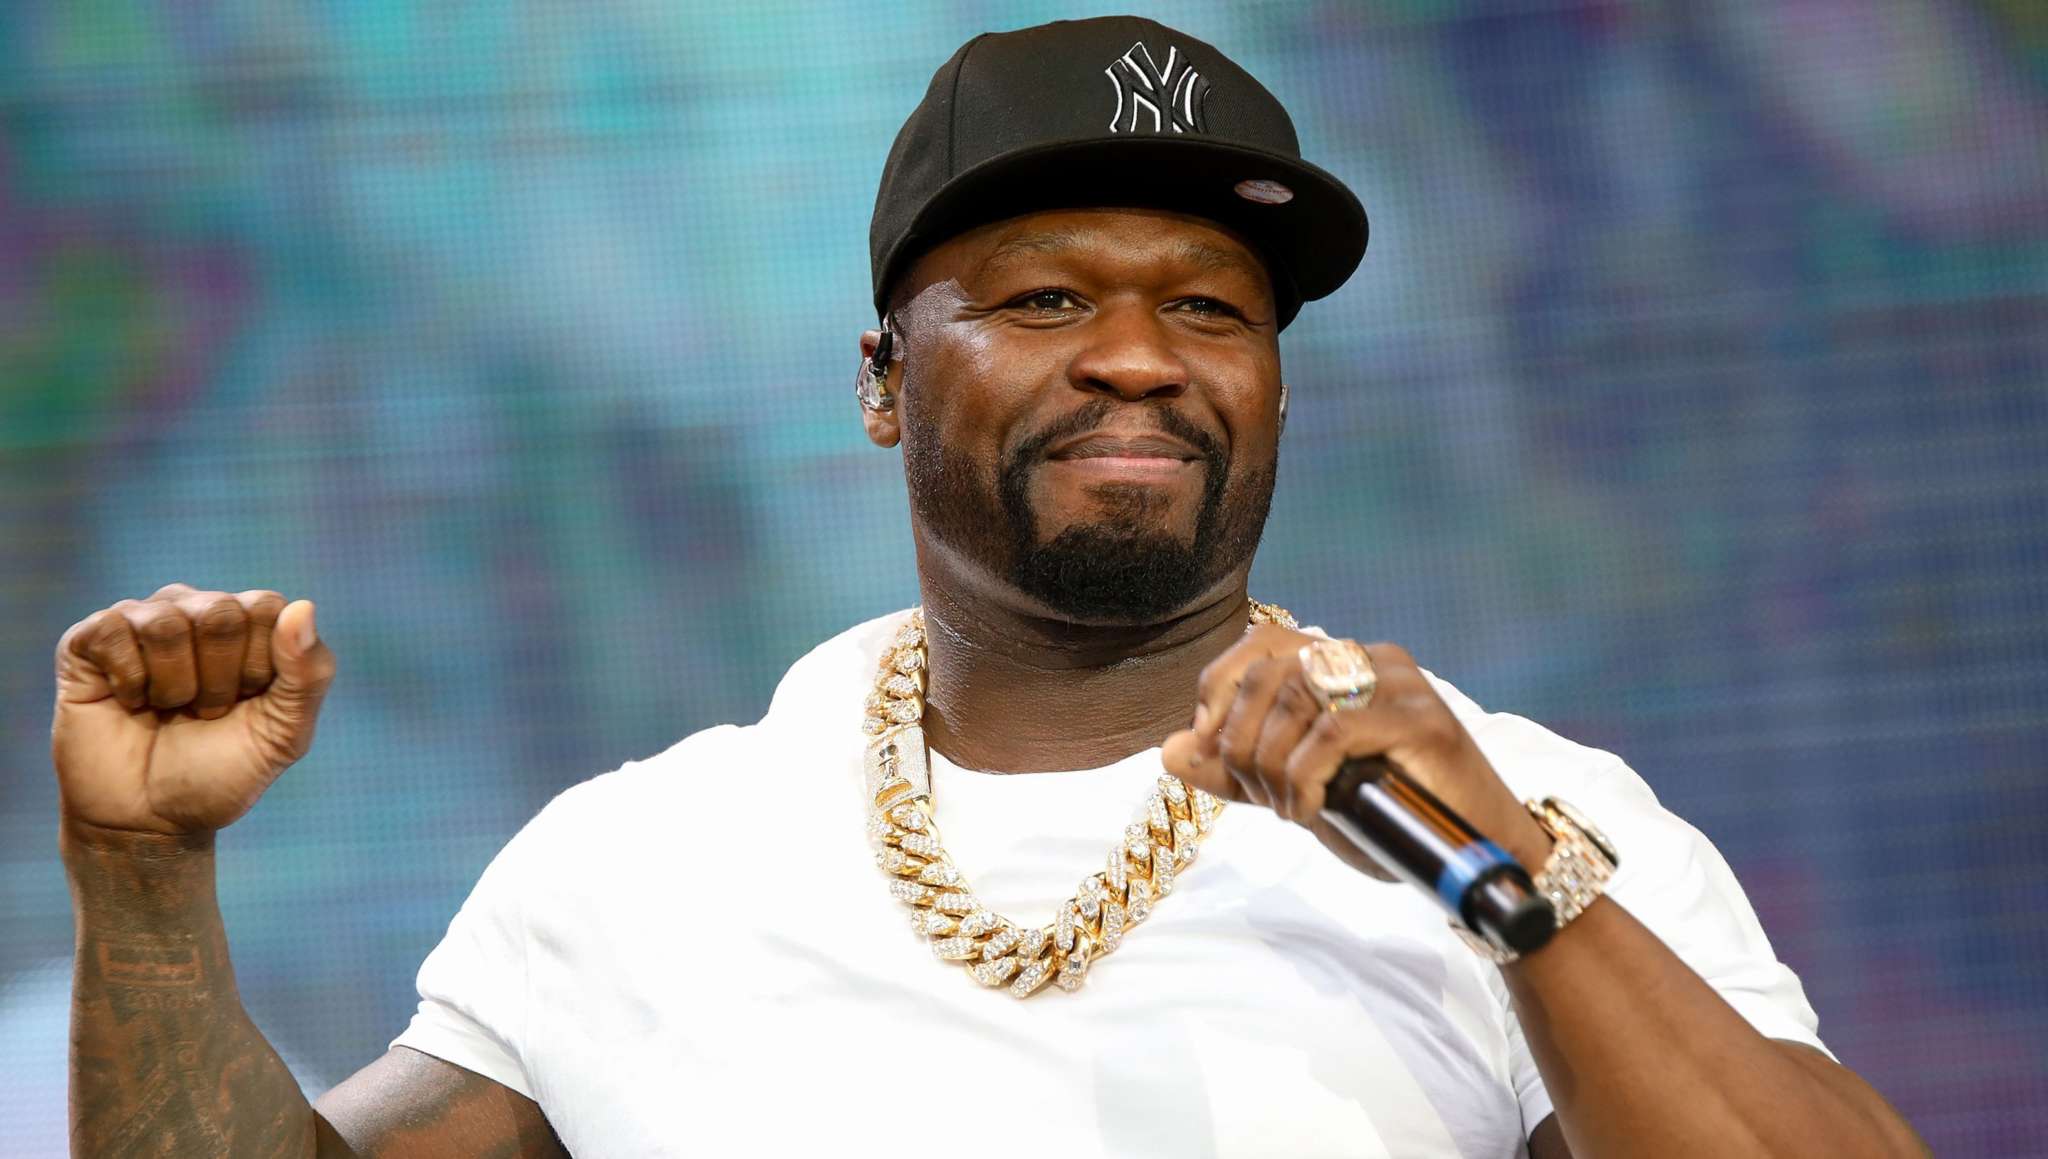 50 CENT JOINS SNOOP DOGG IN THE RAPPER BOXING CRAZE, SERVING AS THE TRILLER COMMENTATOR FOR THE HOLYFIELD VS. BELFORT FIGHT.